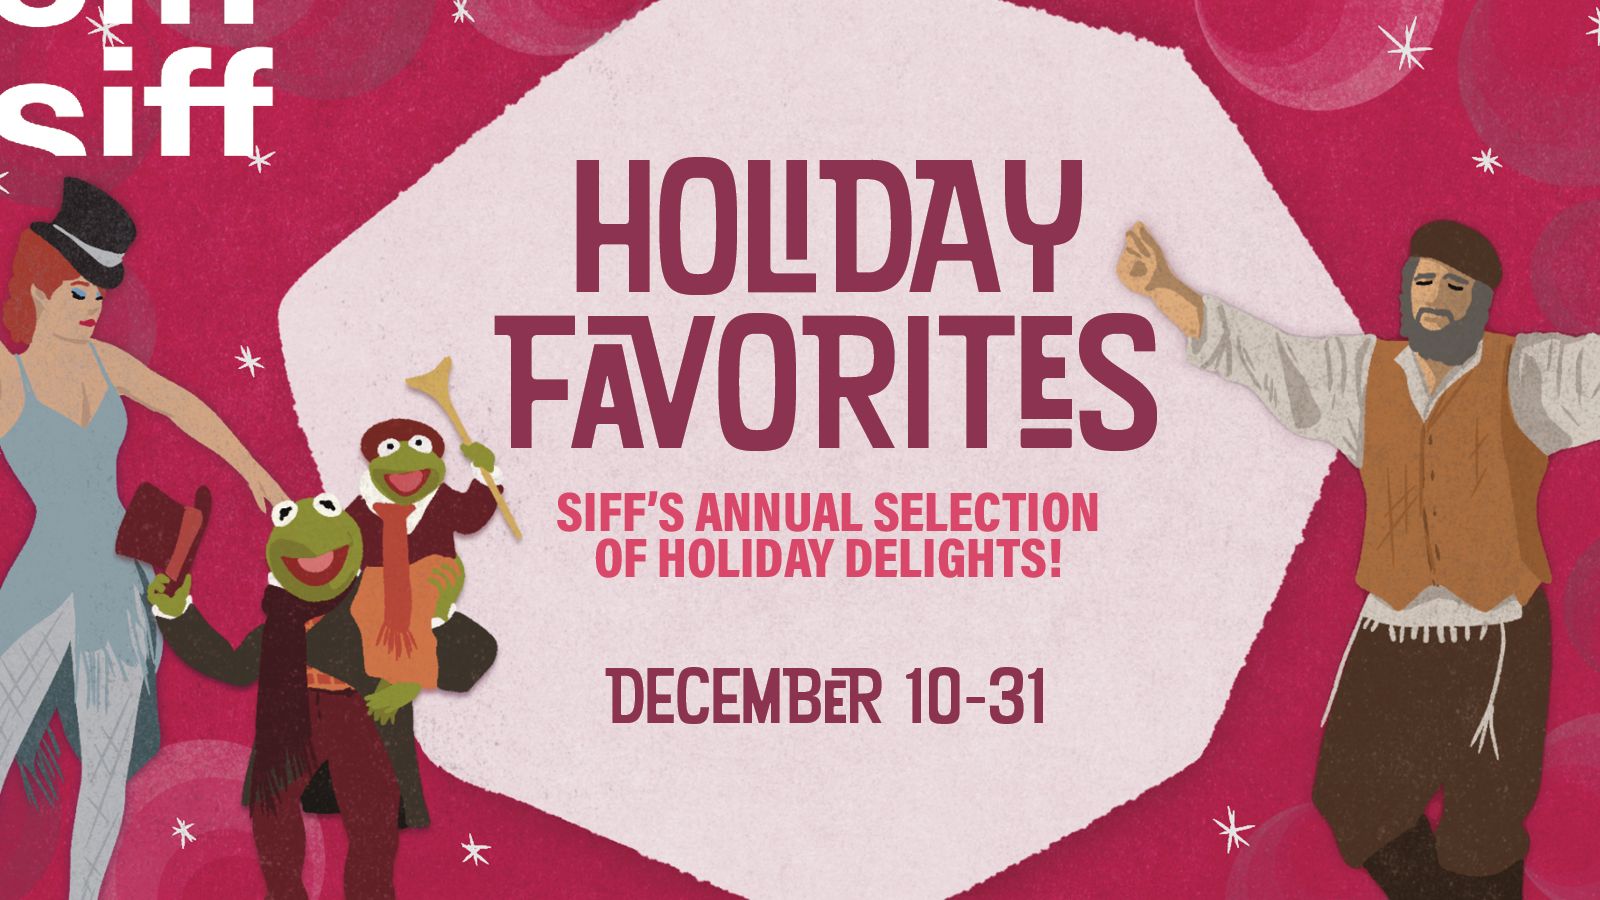 Holiday Favorites returns to SIFF Cinema Uptown featuring beloved seasonal classics through the month of December